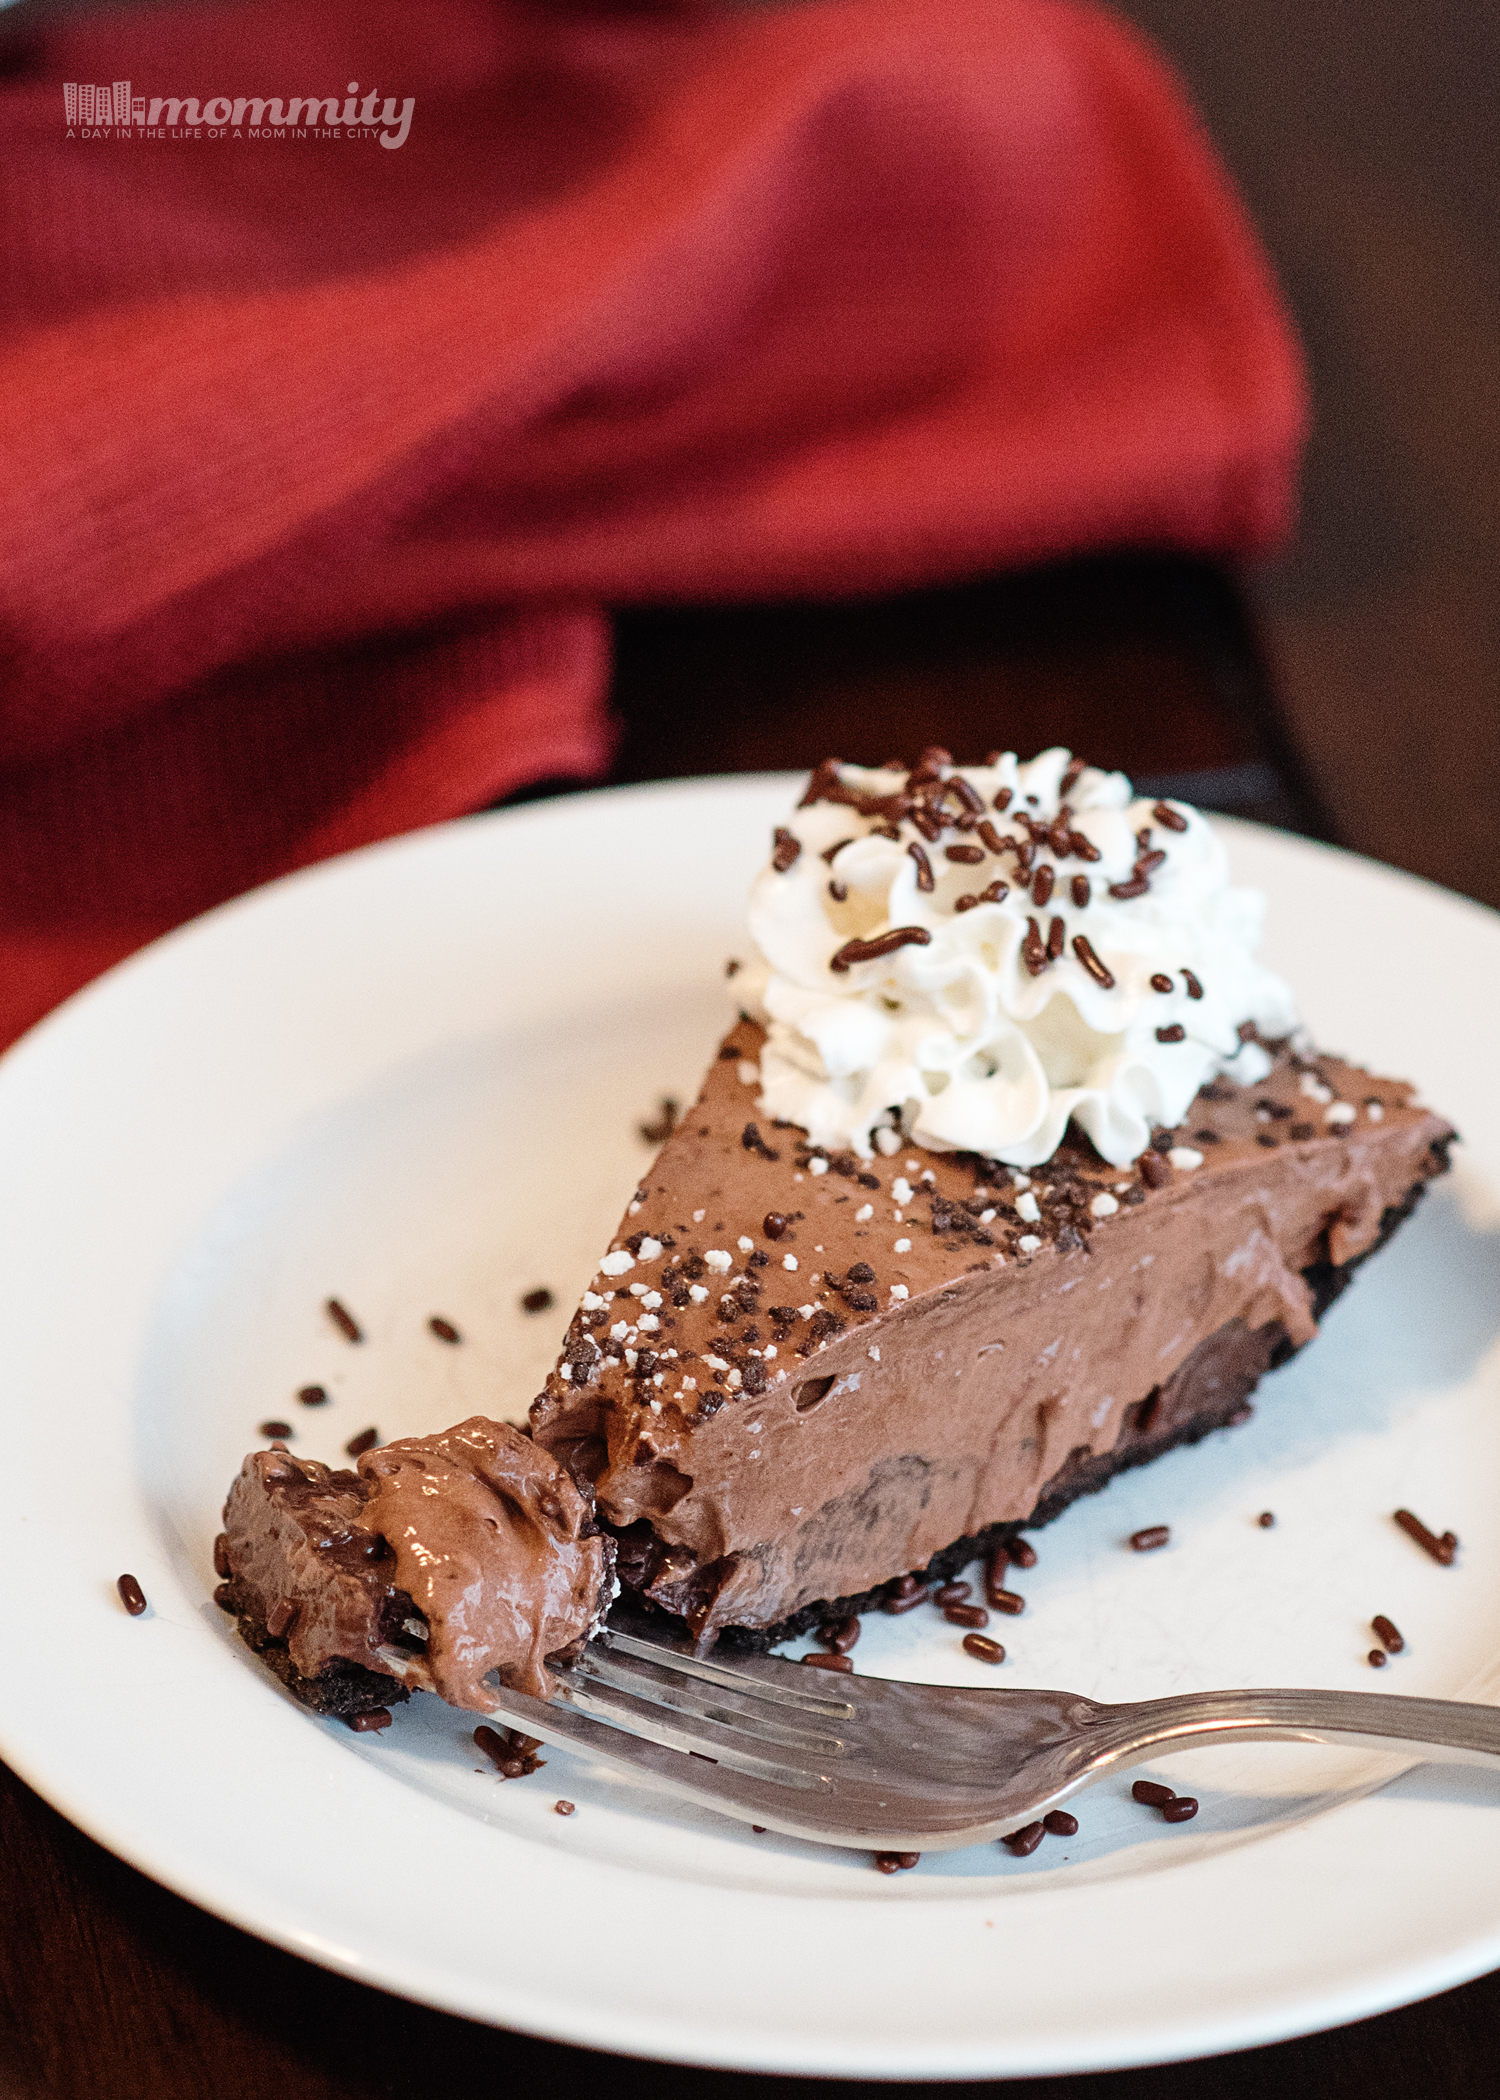 Are you looking for a no bake chocolate pudding pie recipe that is not only delicious, it's packed with protein too?! I've got you covered with this amazing recipe using protein powder and simple ingredients to quickly whip this dessert up.